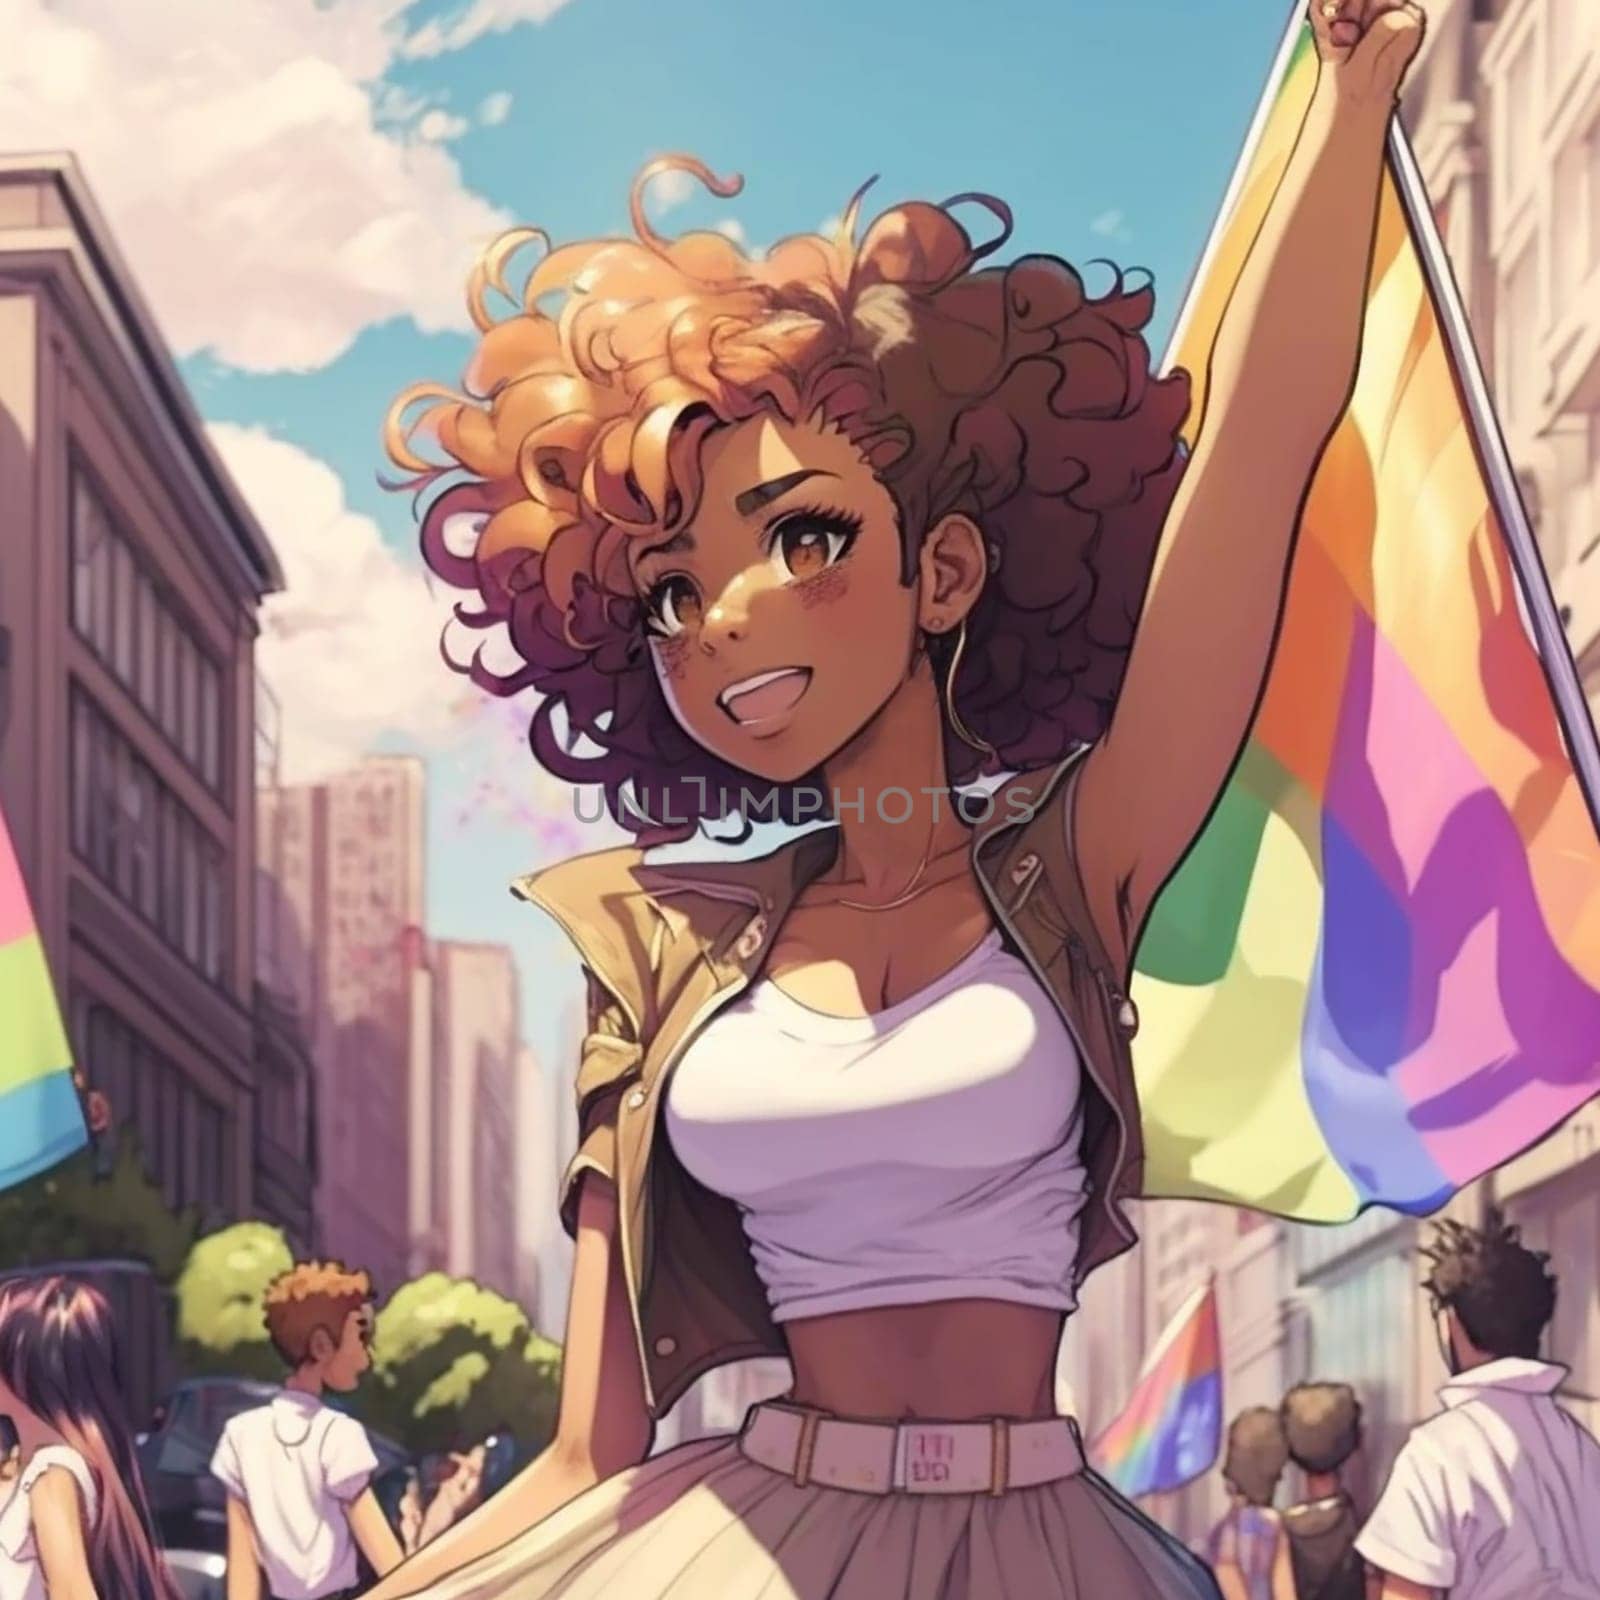 Portrait, pride and woman in city with flag for lgbtq community, ally or lesbian with support and equality in love outdoor. Rainbow, parade and lgbt awareness, inclusion and celebrate with sexuality